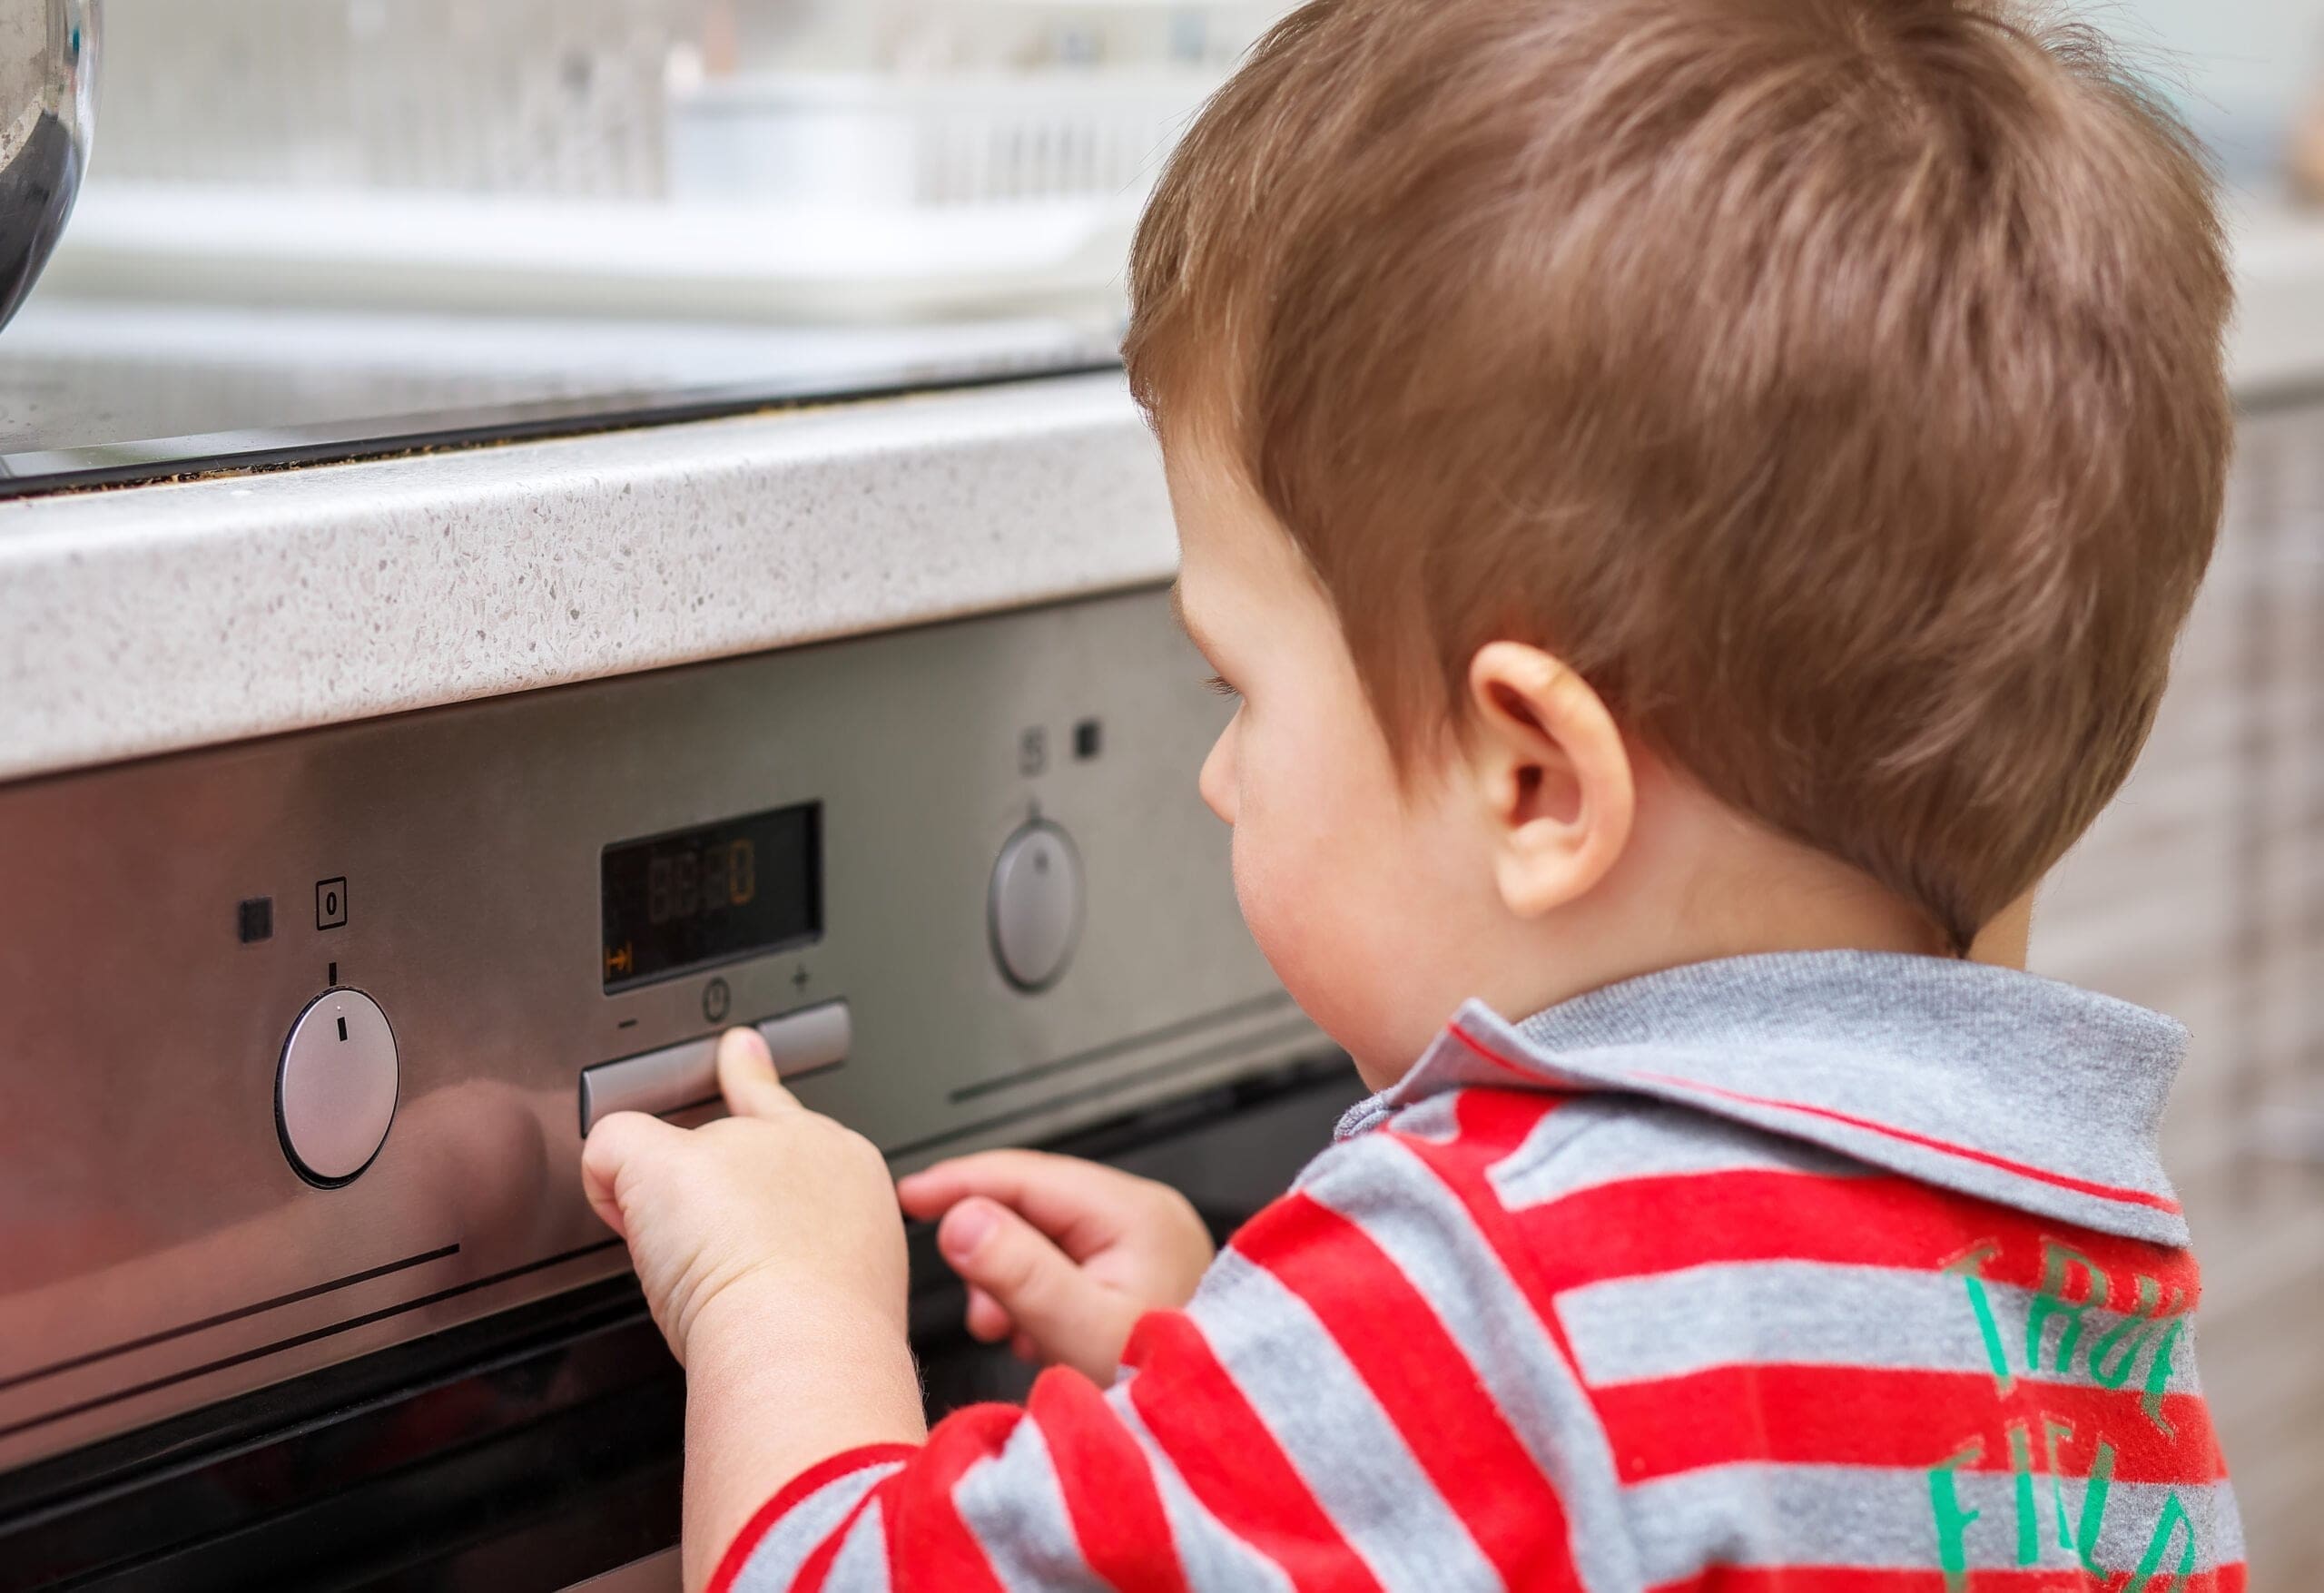 dangerous-situation-kitchen-child-playing-with-electric-oven